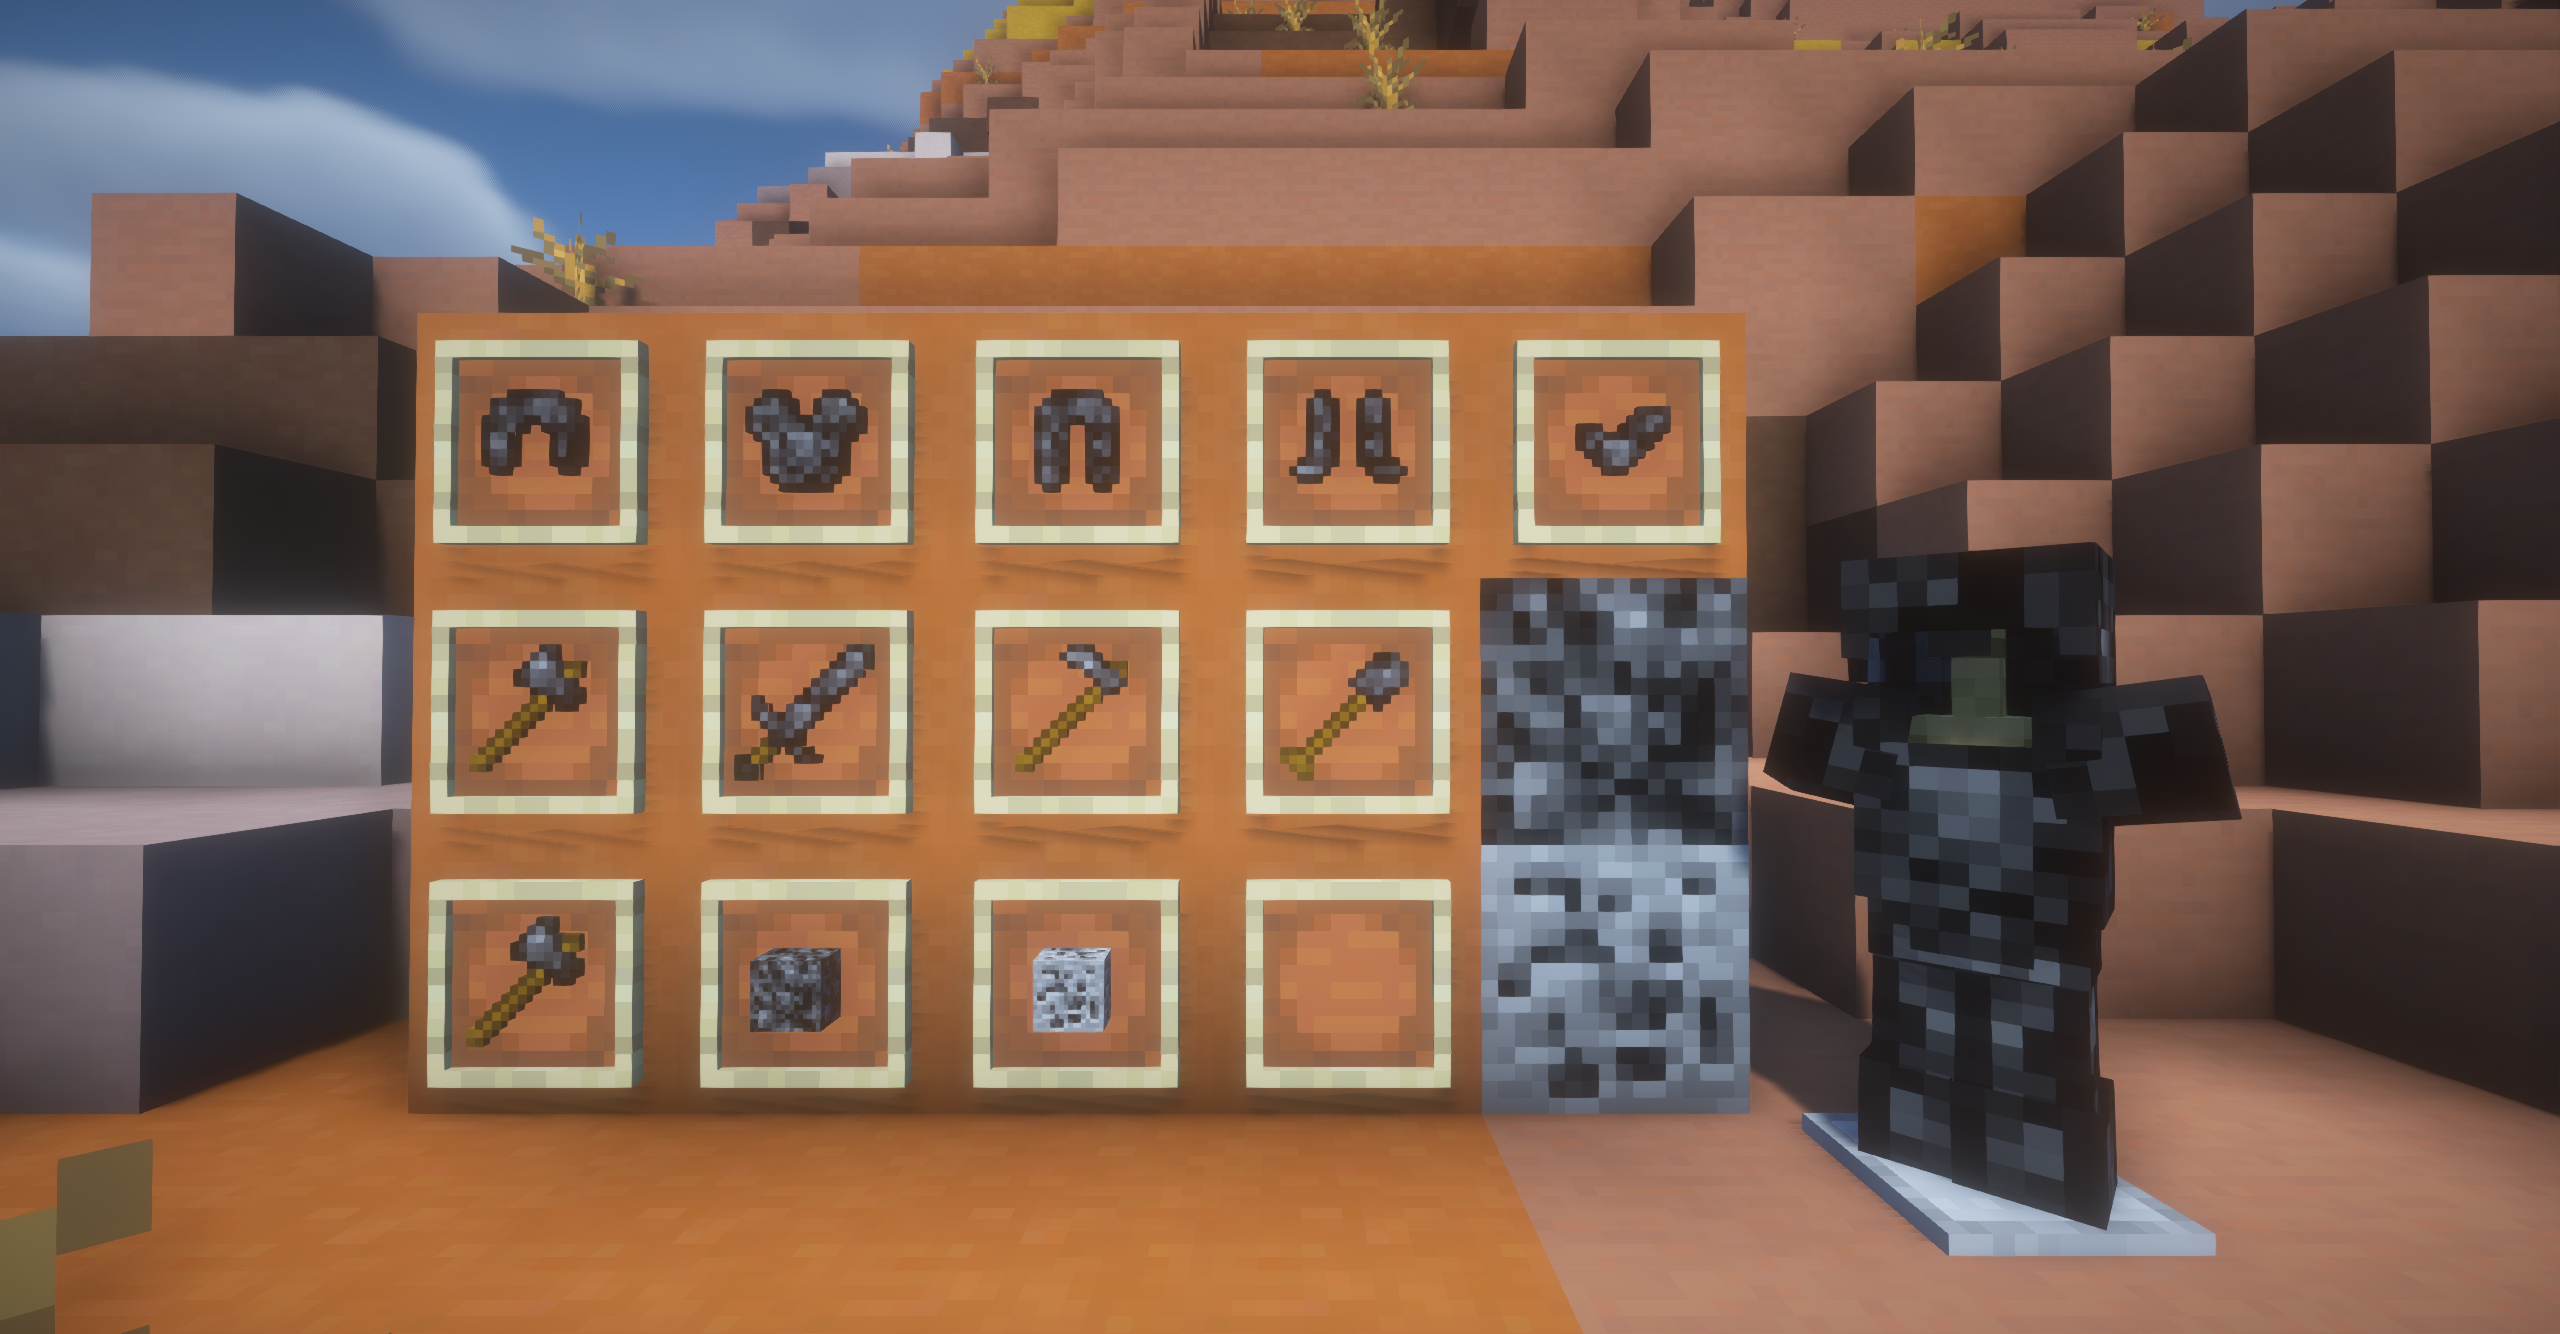 Ores and Items